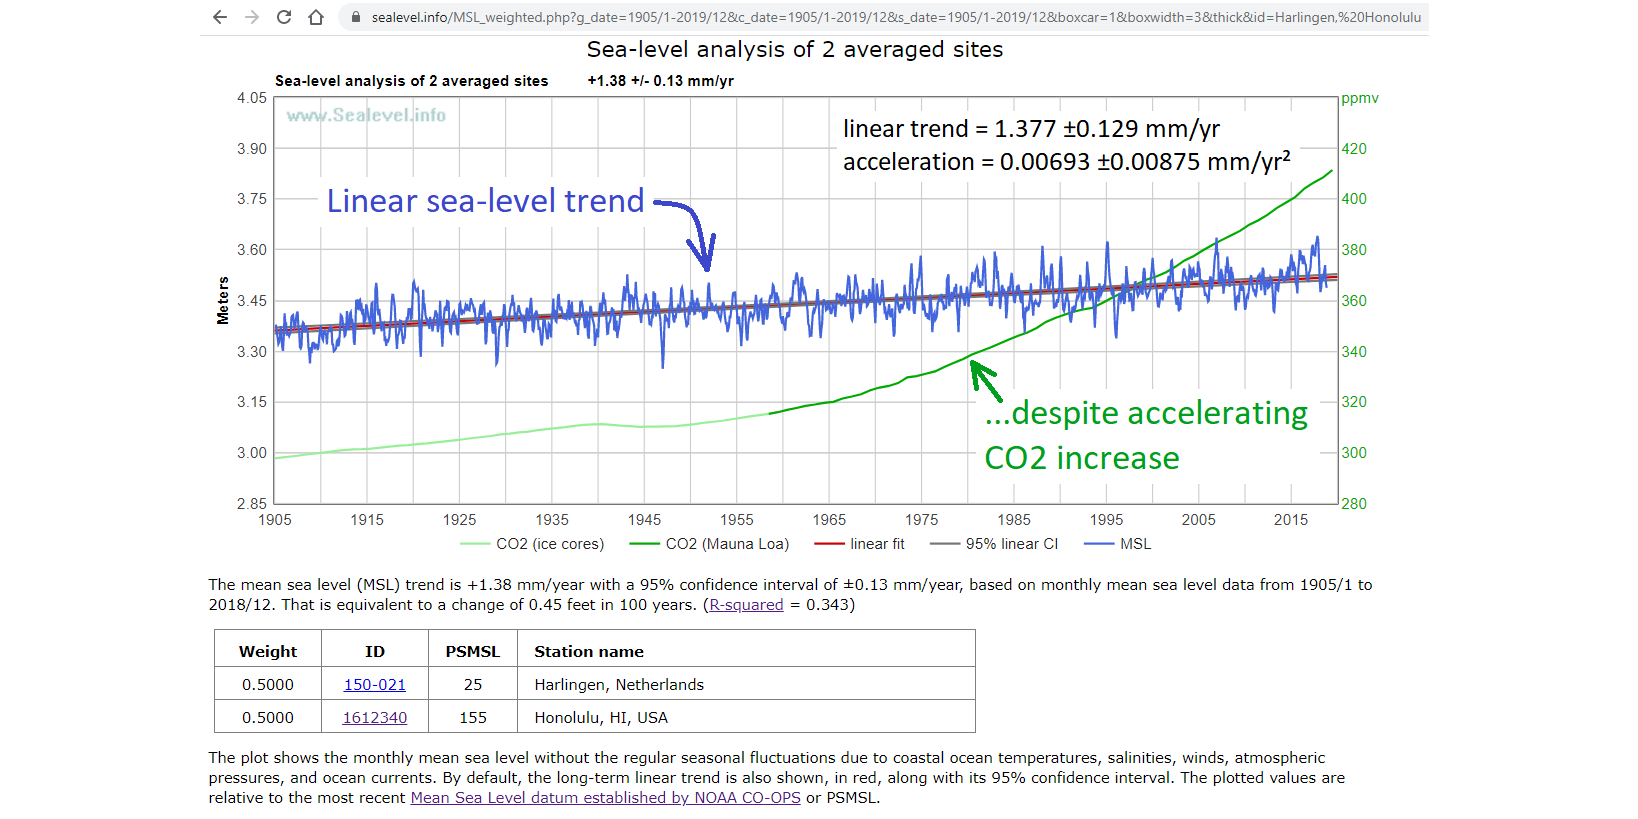 sea-level analysis of the average of two very high-quality, long measurement records, on opposite sides of the Earth